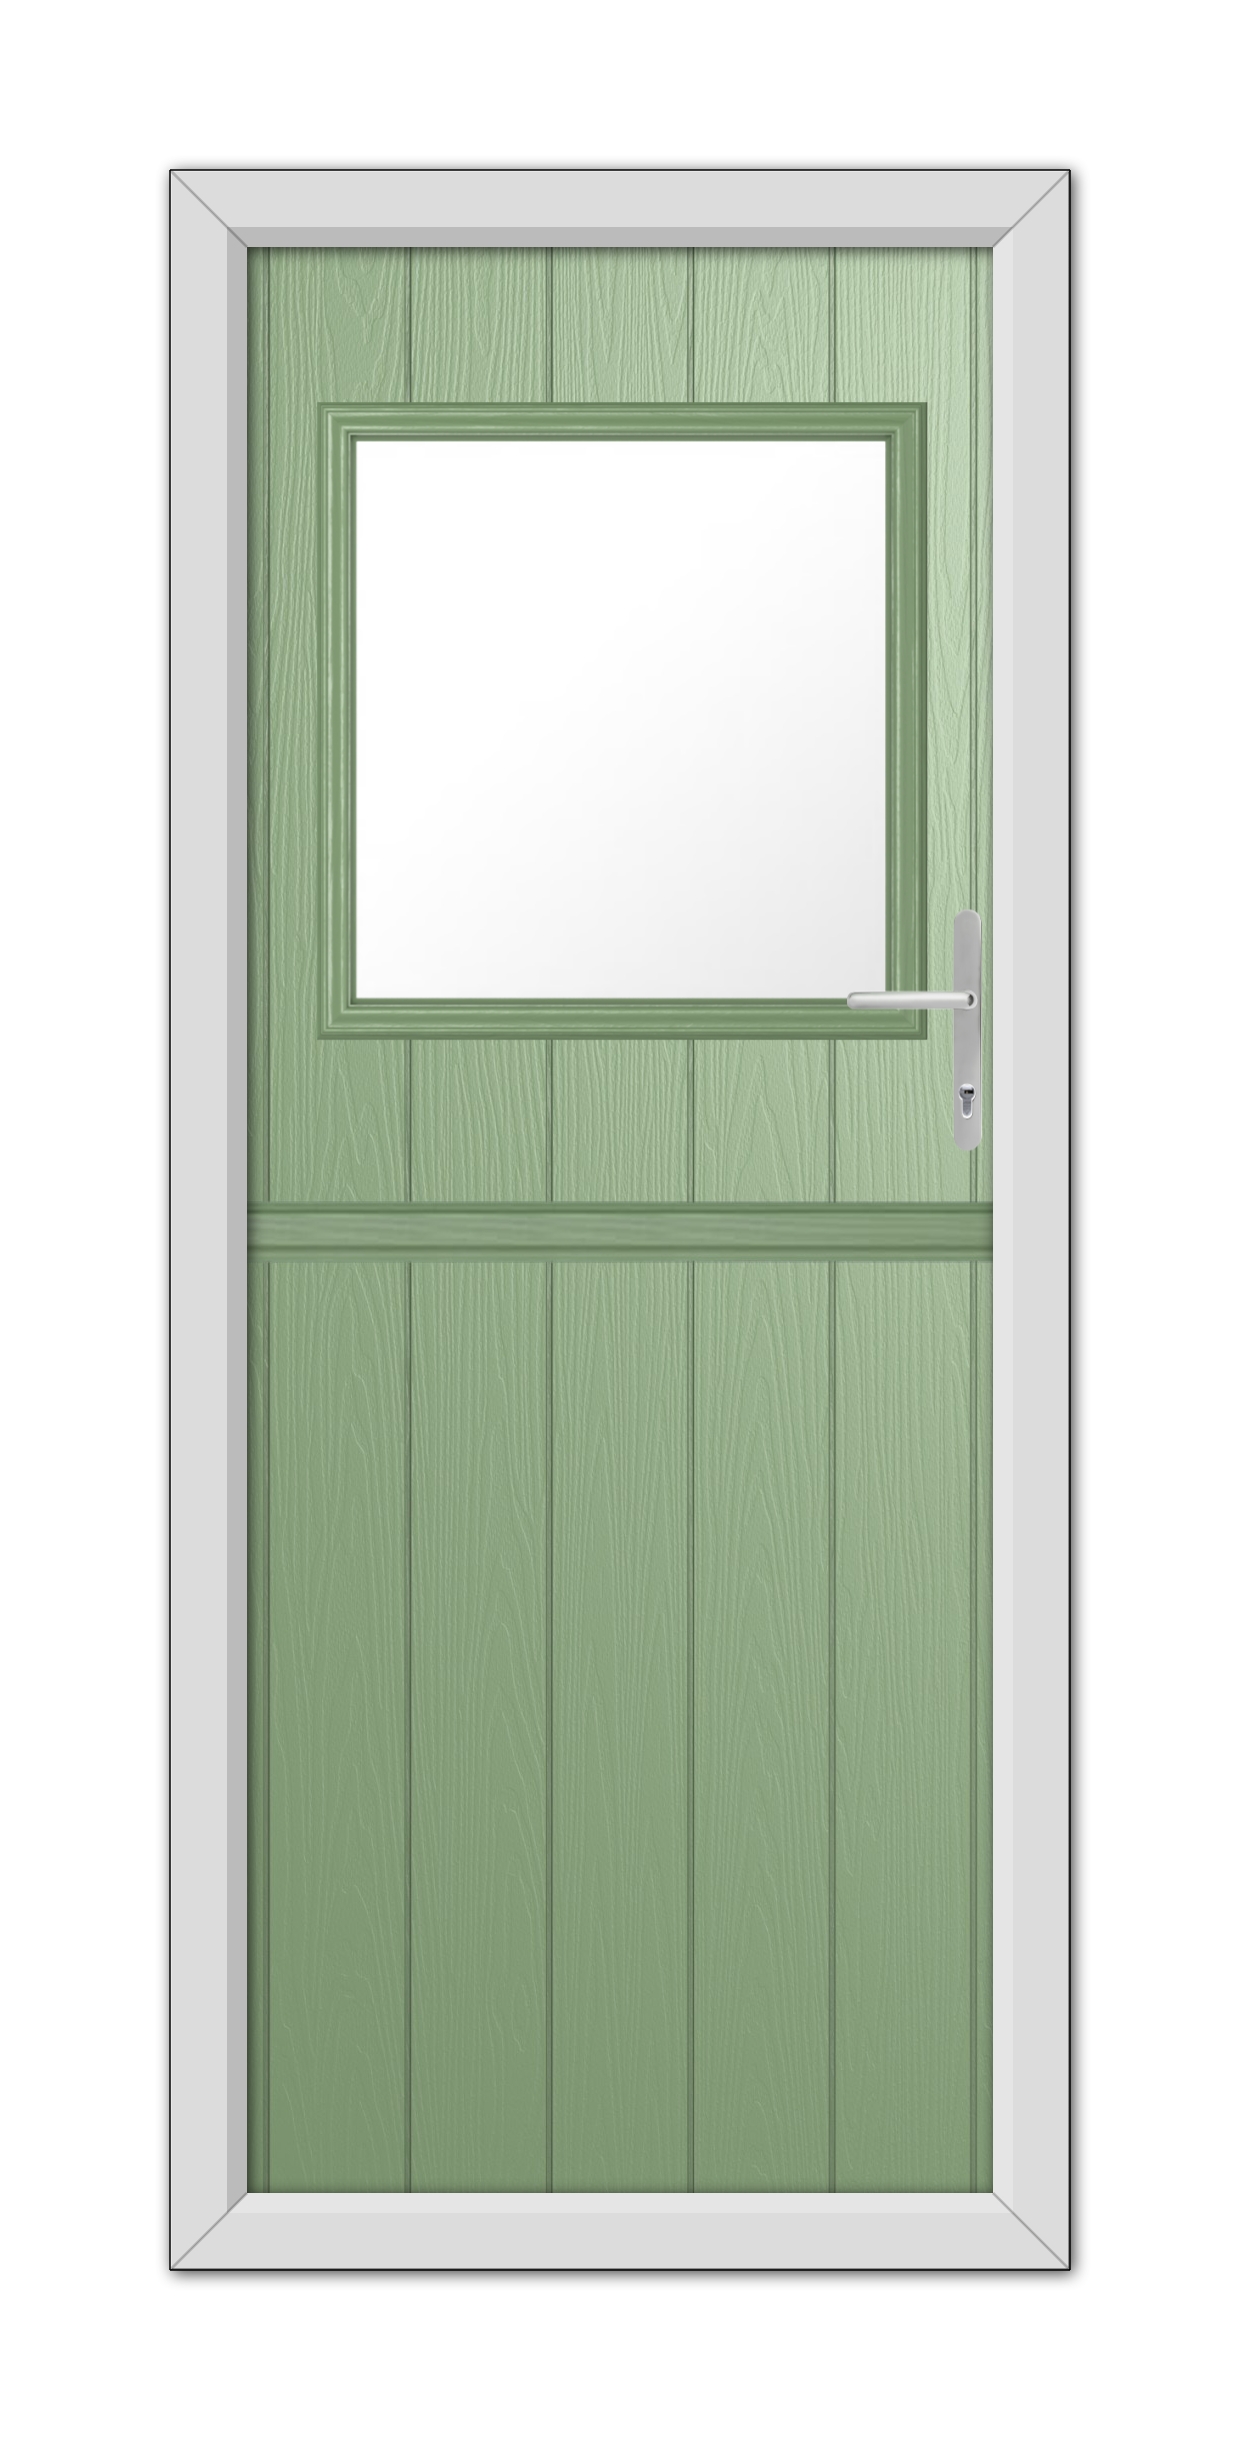 A Chartwell Green Fife Stable Composite Door 48mm Timber Core with a rectangular window at the top, encased in a white frame, viewed frontally.